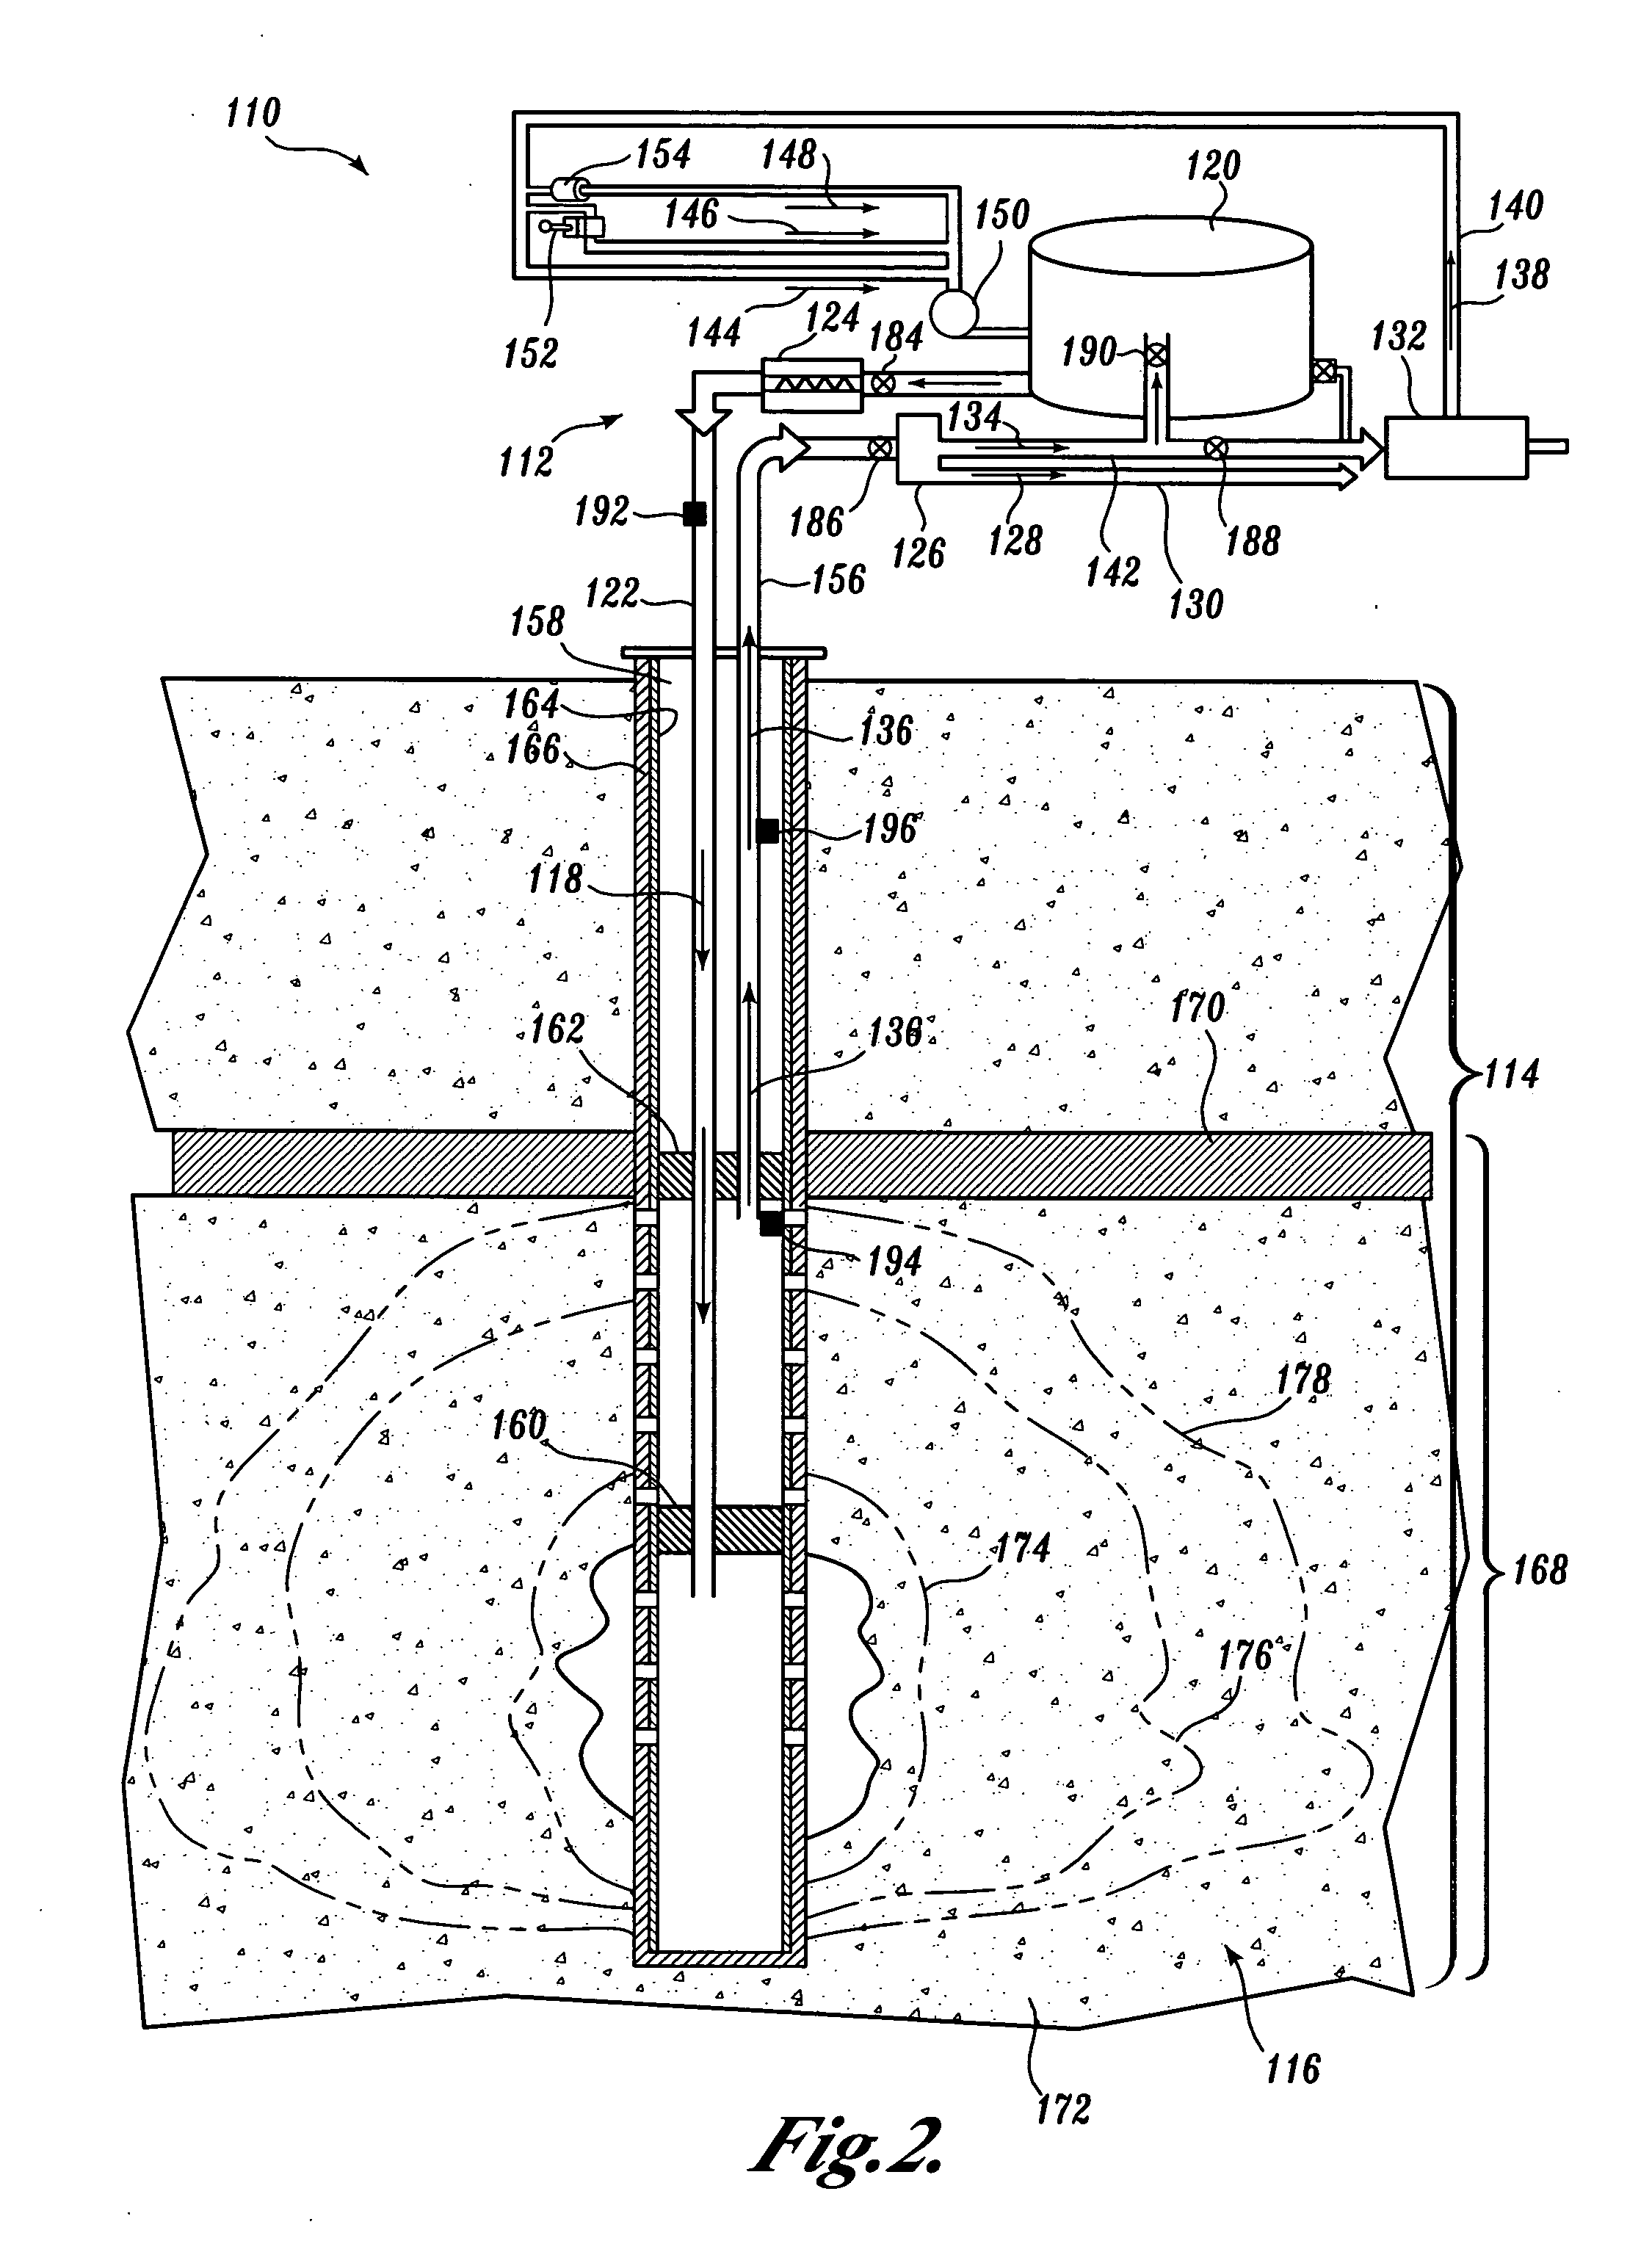 Method of sequestering carbon dioxide while producing natural gas